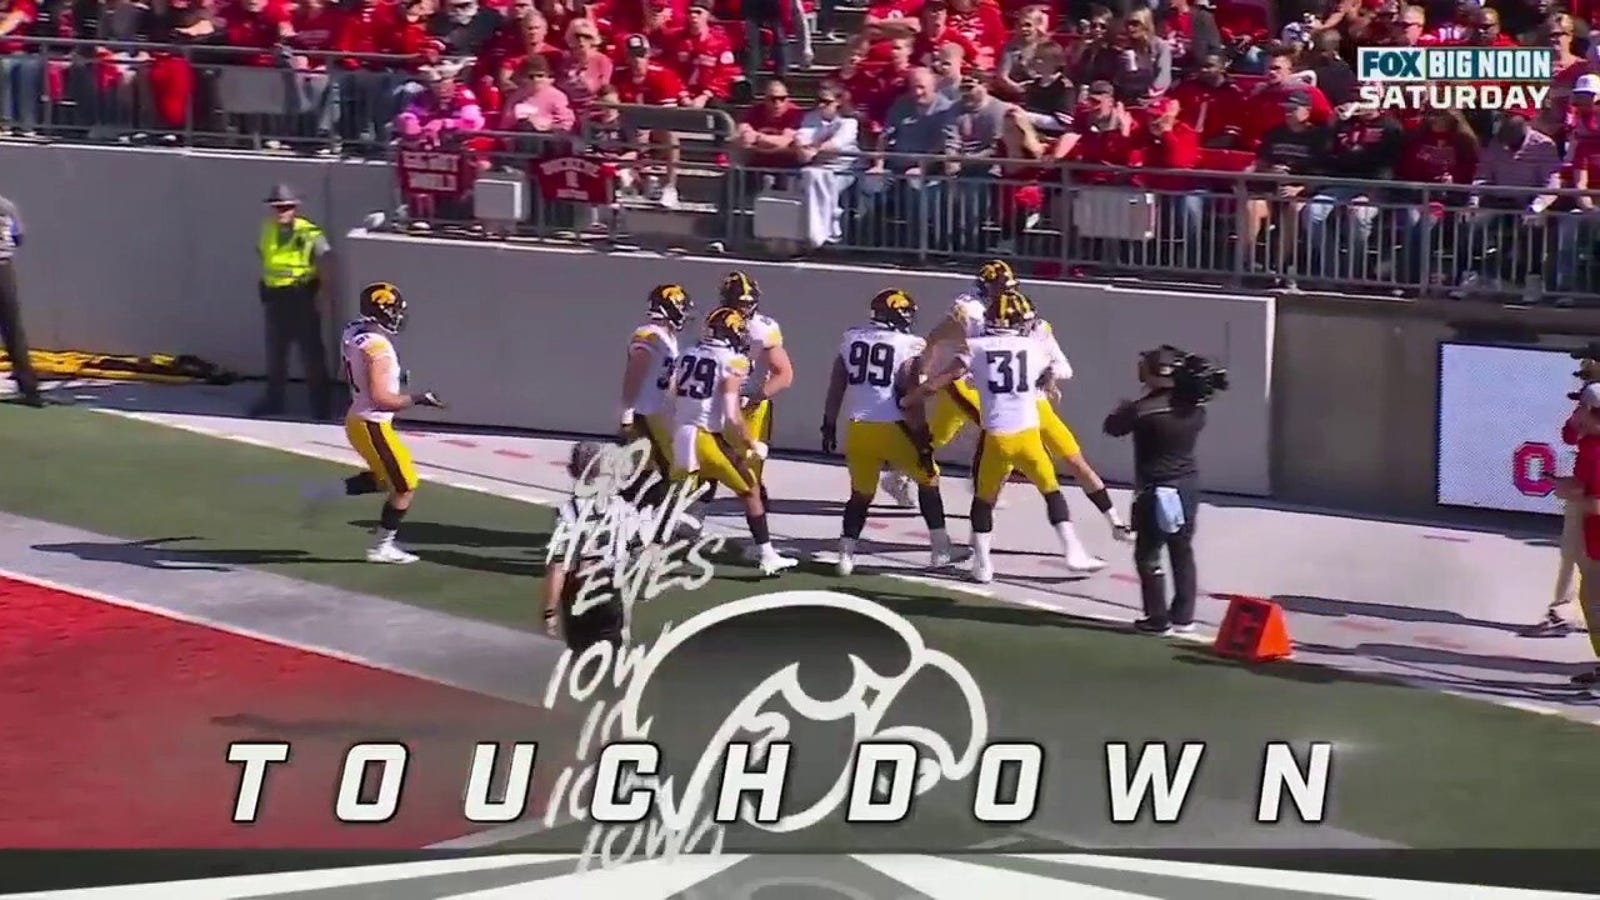 Joe Evans of Iowa recovers from confusion and runs it backwards for 11 yards